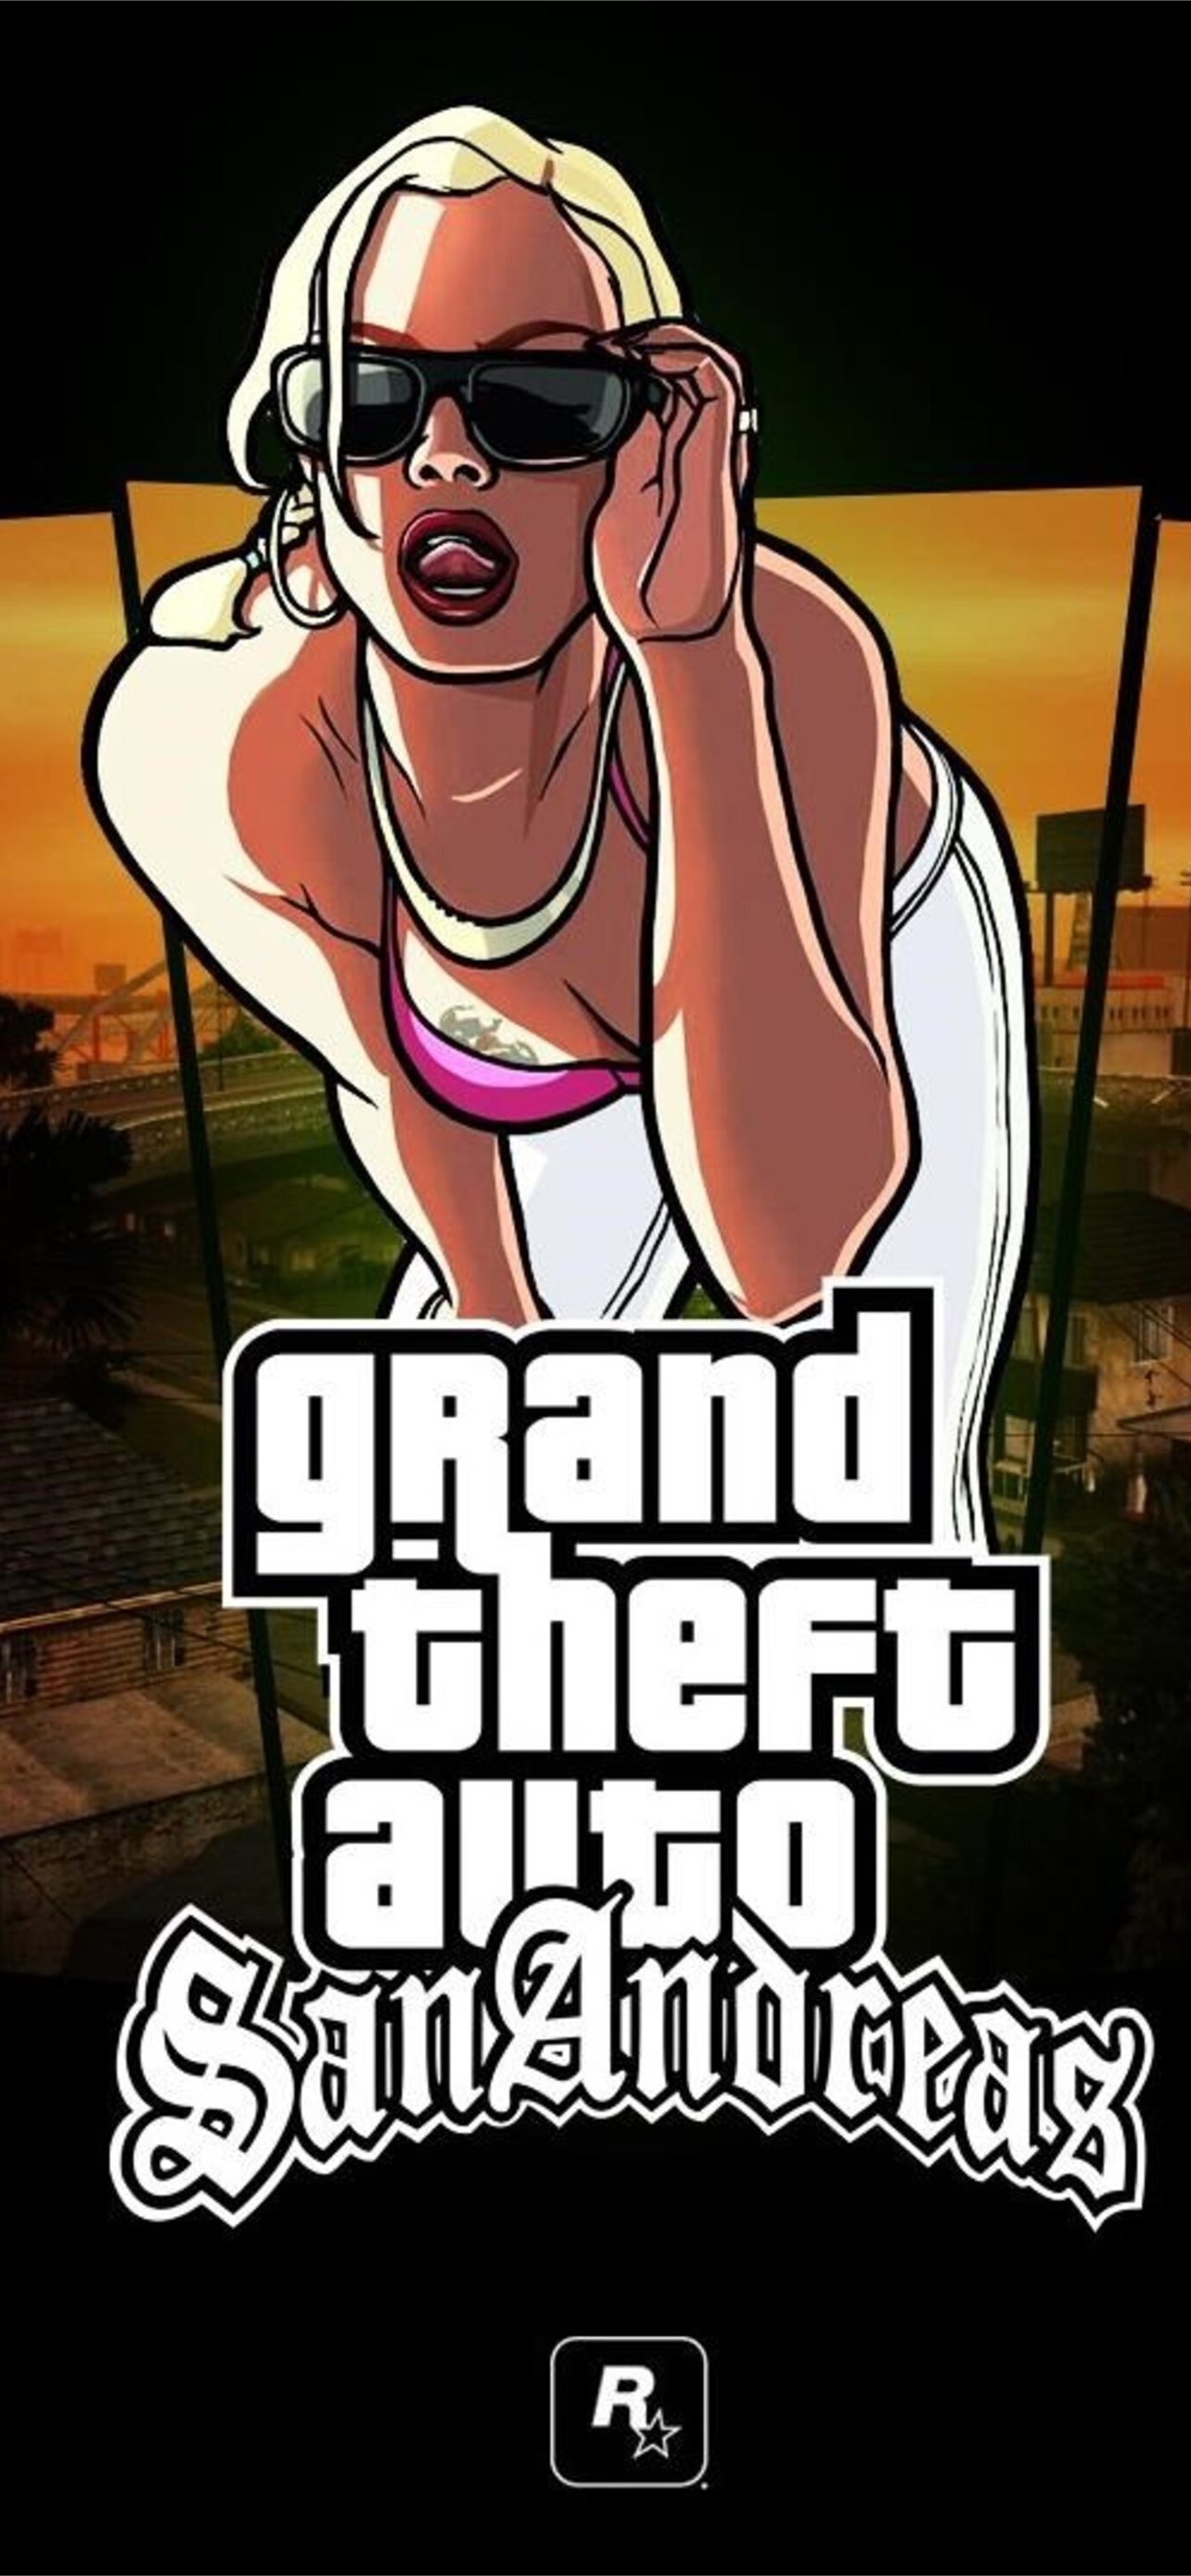 Grand Theft Auto San Andreas, HD iPhone wallpapers, iLikeWallpaper, 1290x2780 HD Handy